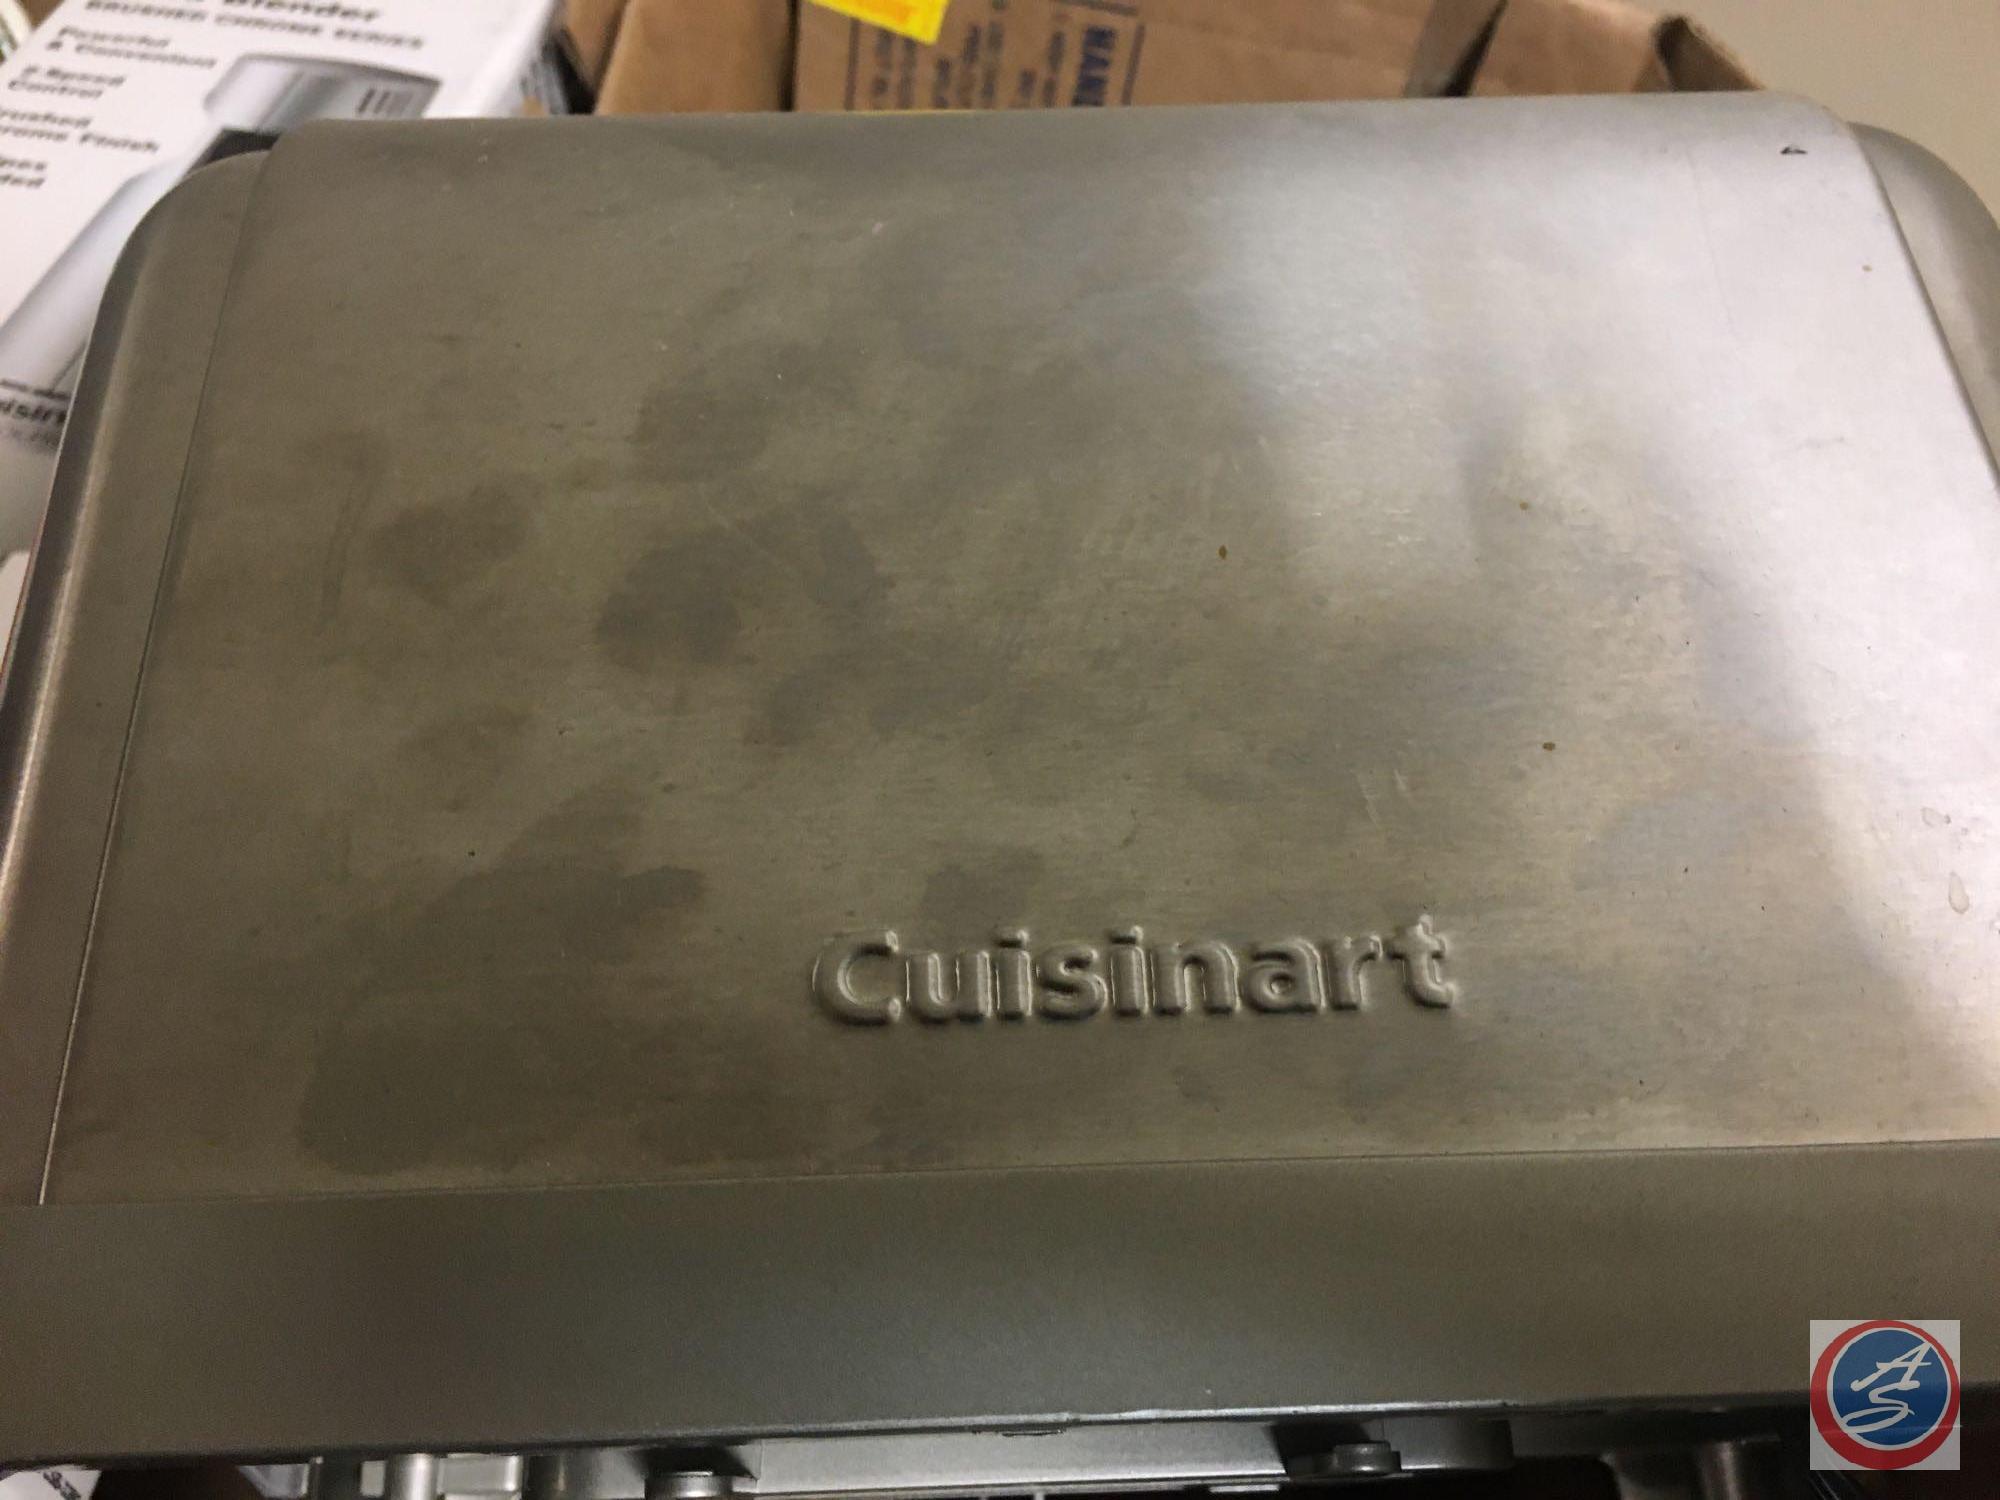 Cuisinart Classic 2-Slice Toaster...Stainless Steel and...Retro Series...Nostalgia Pop-Up 2 Hot Dog 